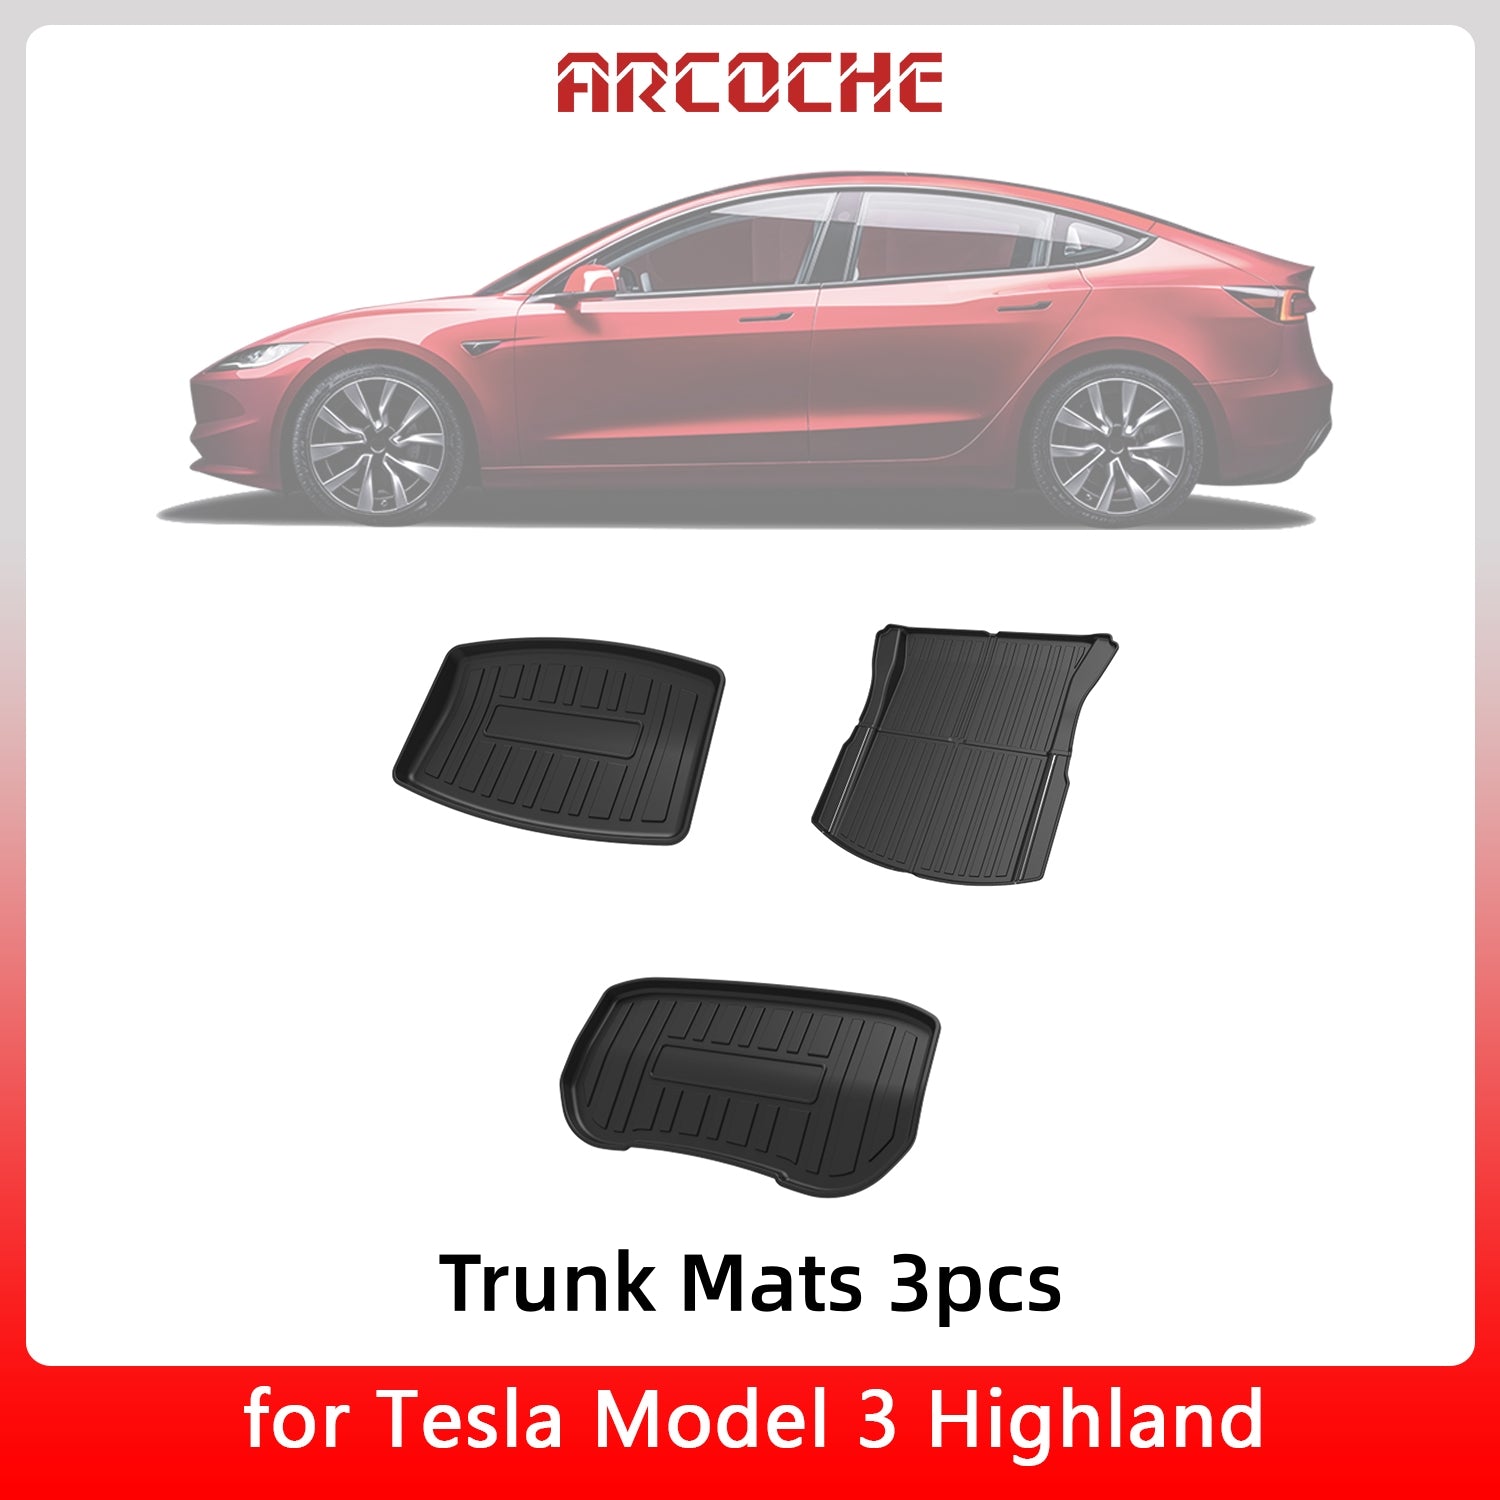 For Model 3 Highland – Arcoche